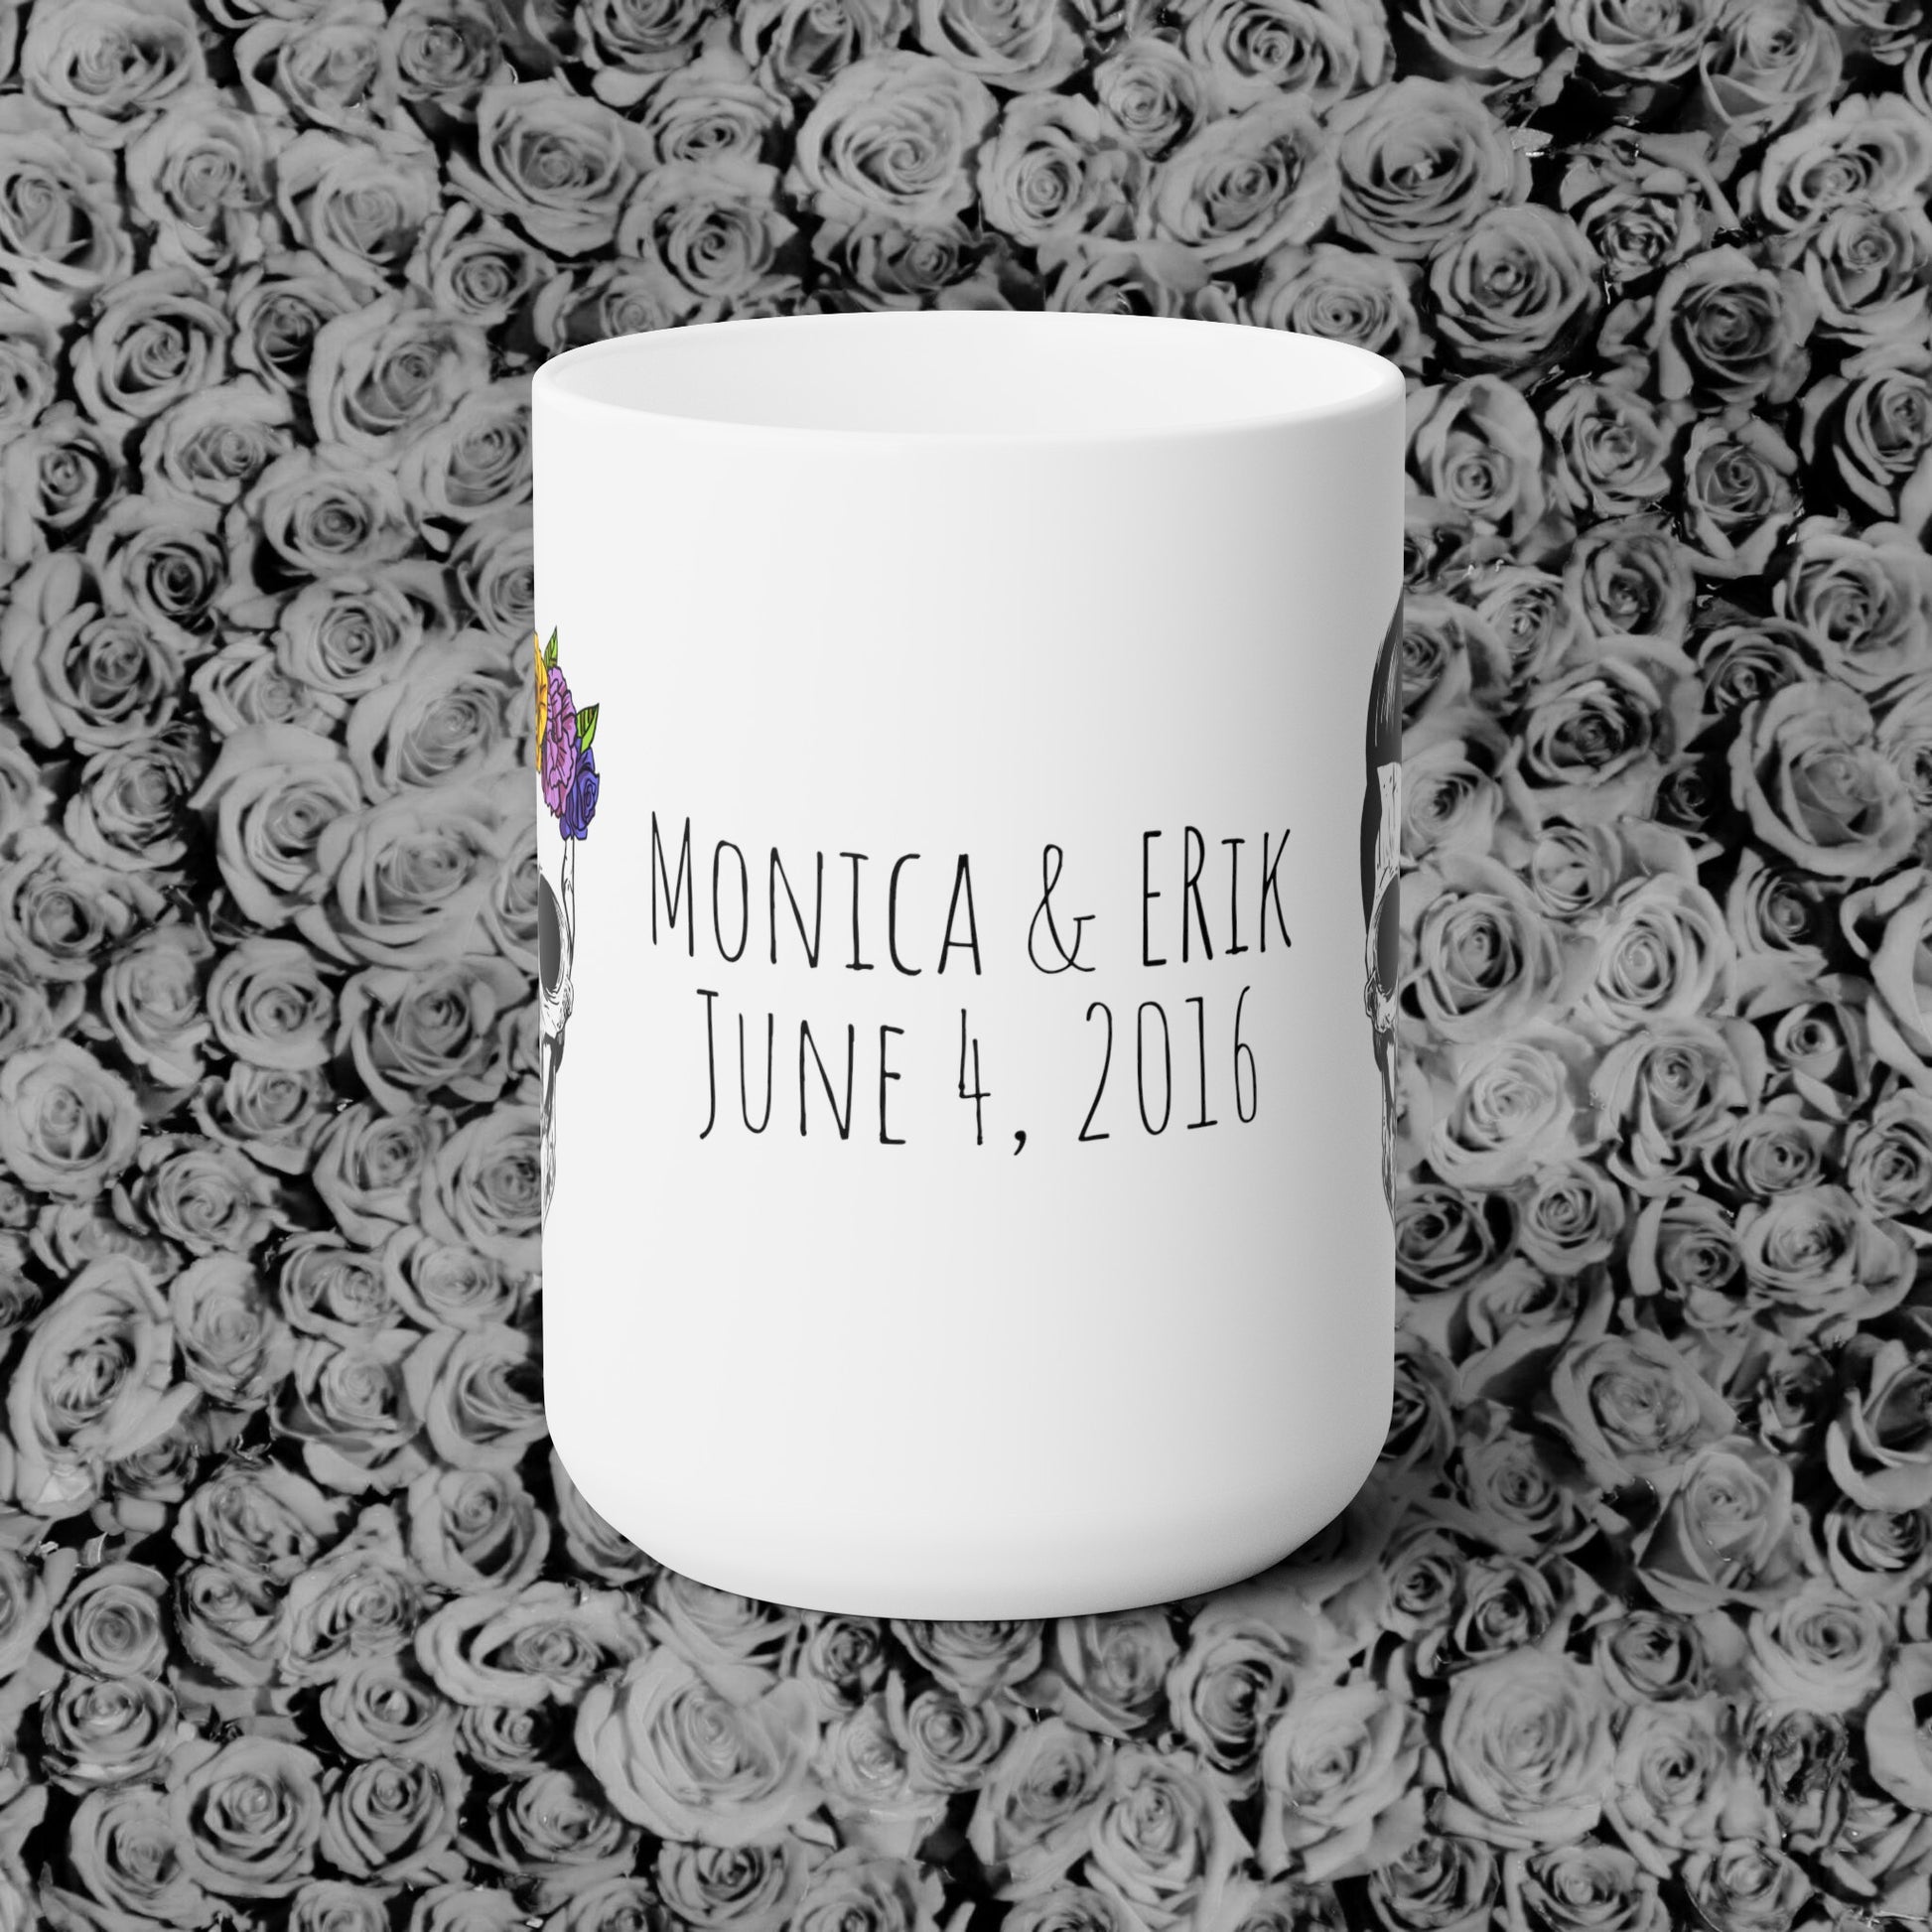 Personalized Day Of The Dead Coffee Mugs For Couples Mug Brides by Emilia Milan 